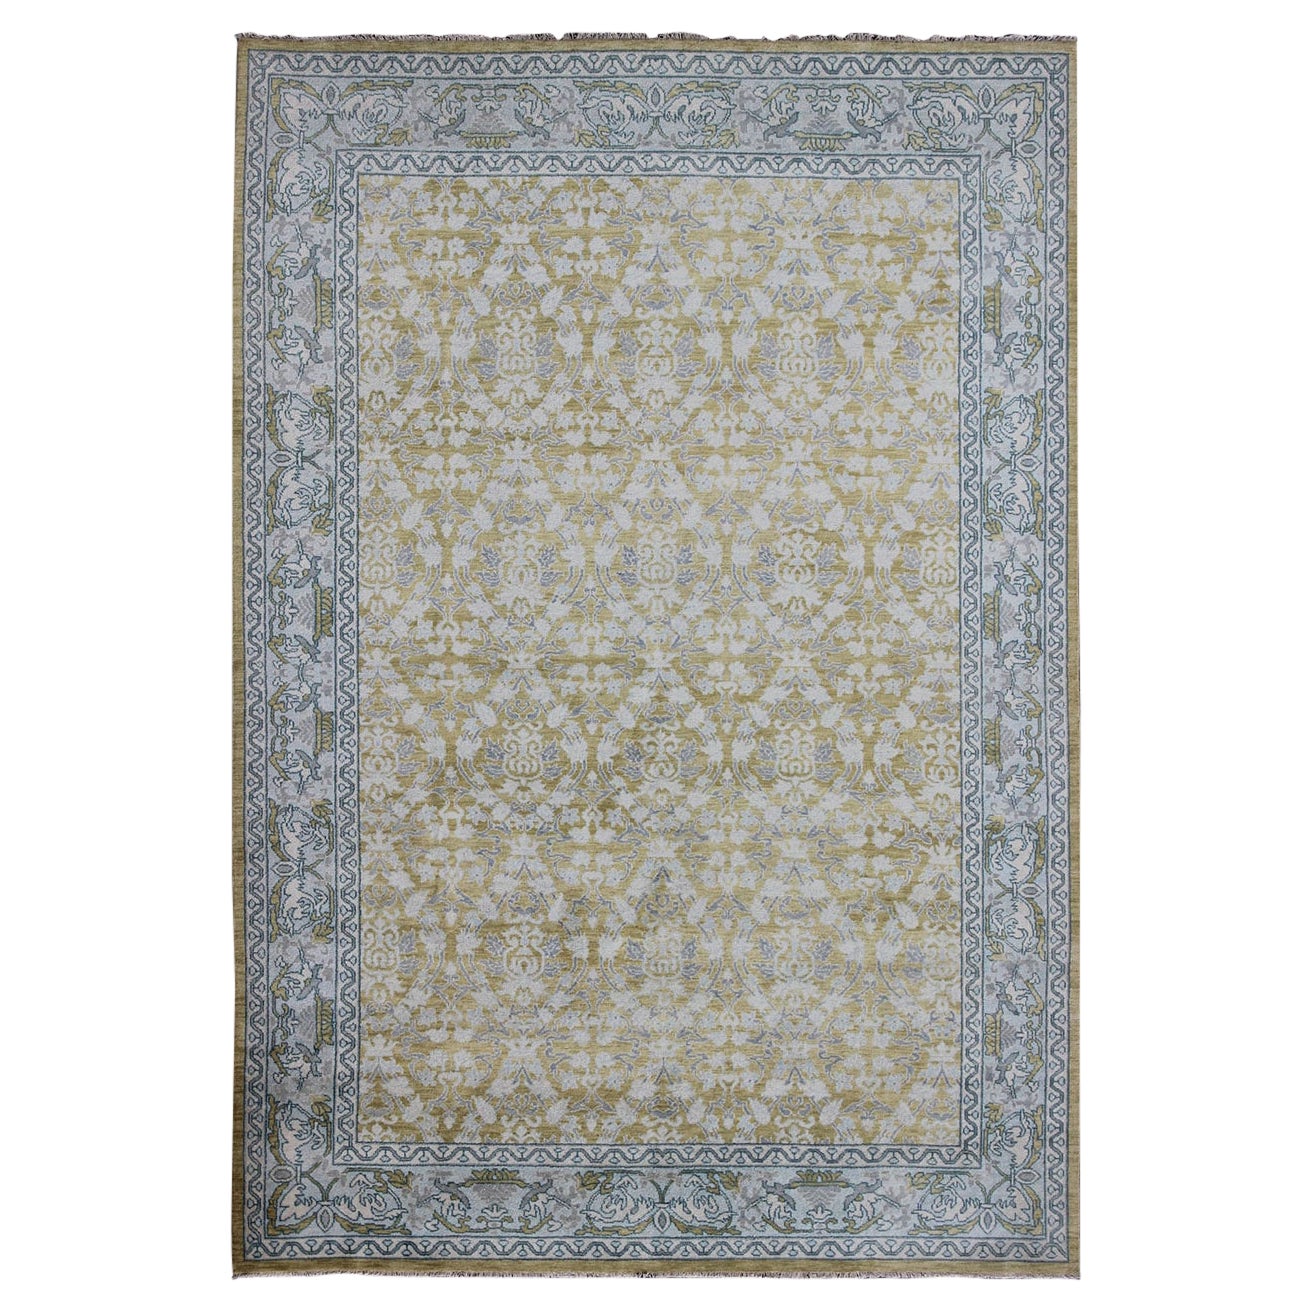 Spanish Design Rug with All-Over Floral Pattern in Acid Yellow Green Grey & Blue For Sale